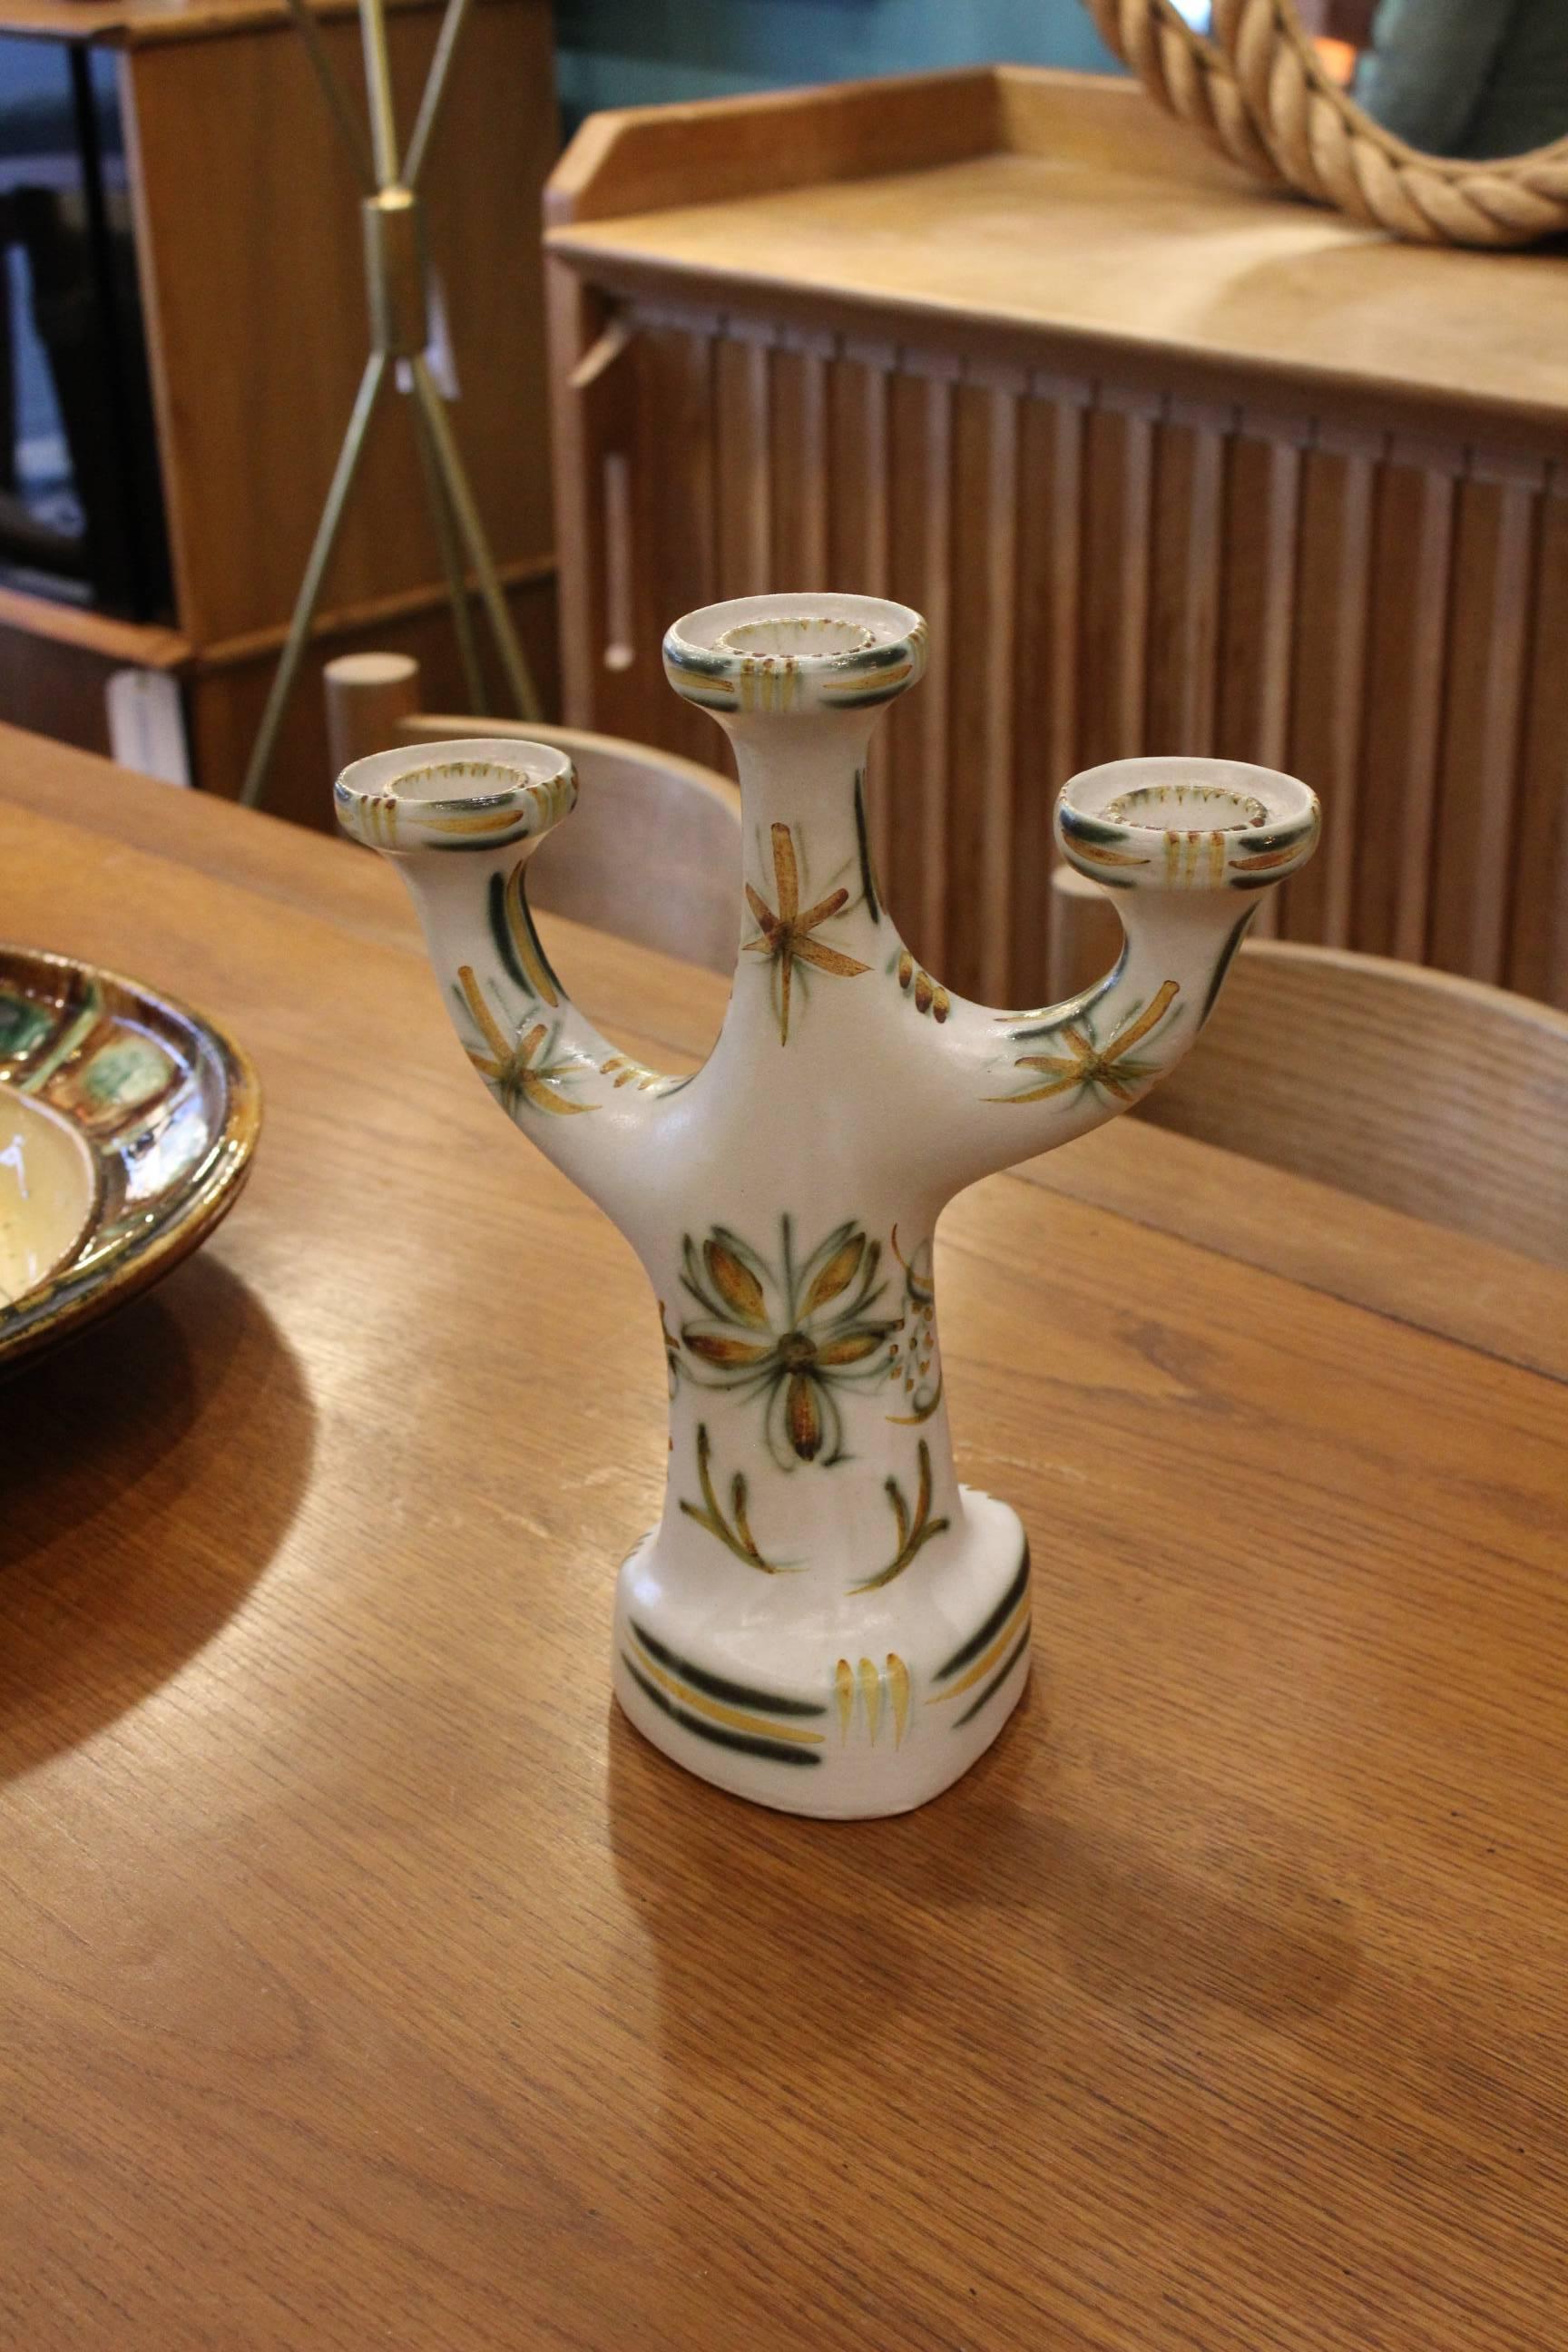 Beautiful pair of Keraluc candlesticks circa 1960, signed
Dimension: H 32 cm x 28 W (White) and H 32 x 27 W (green).